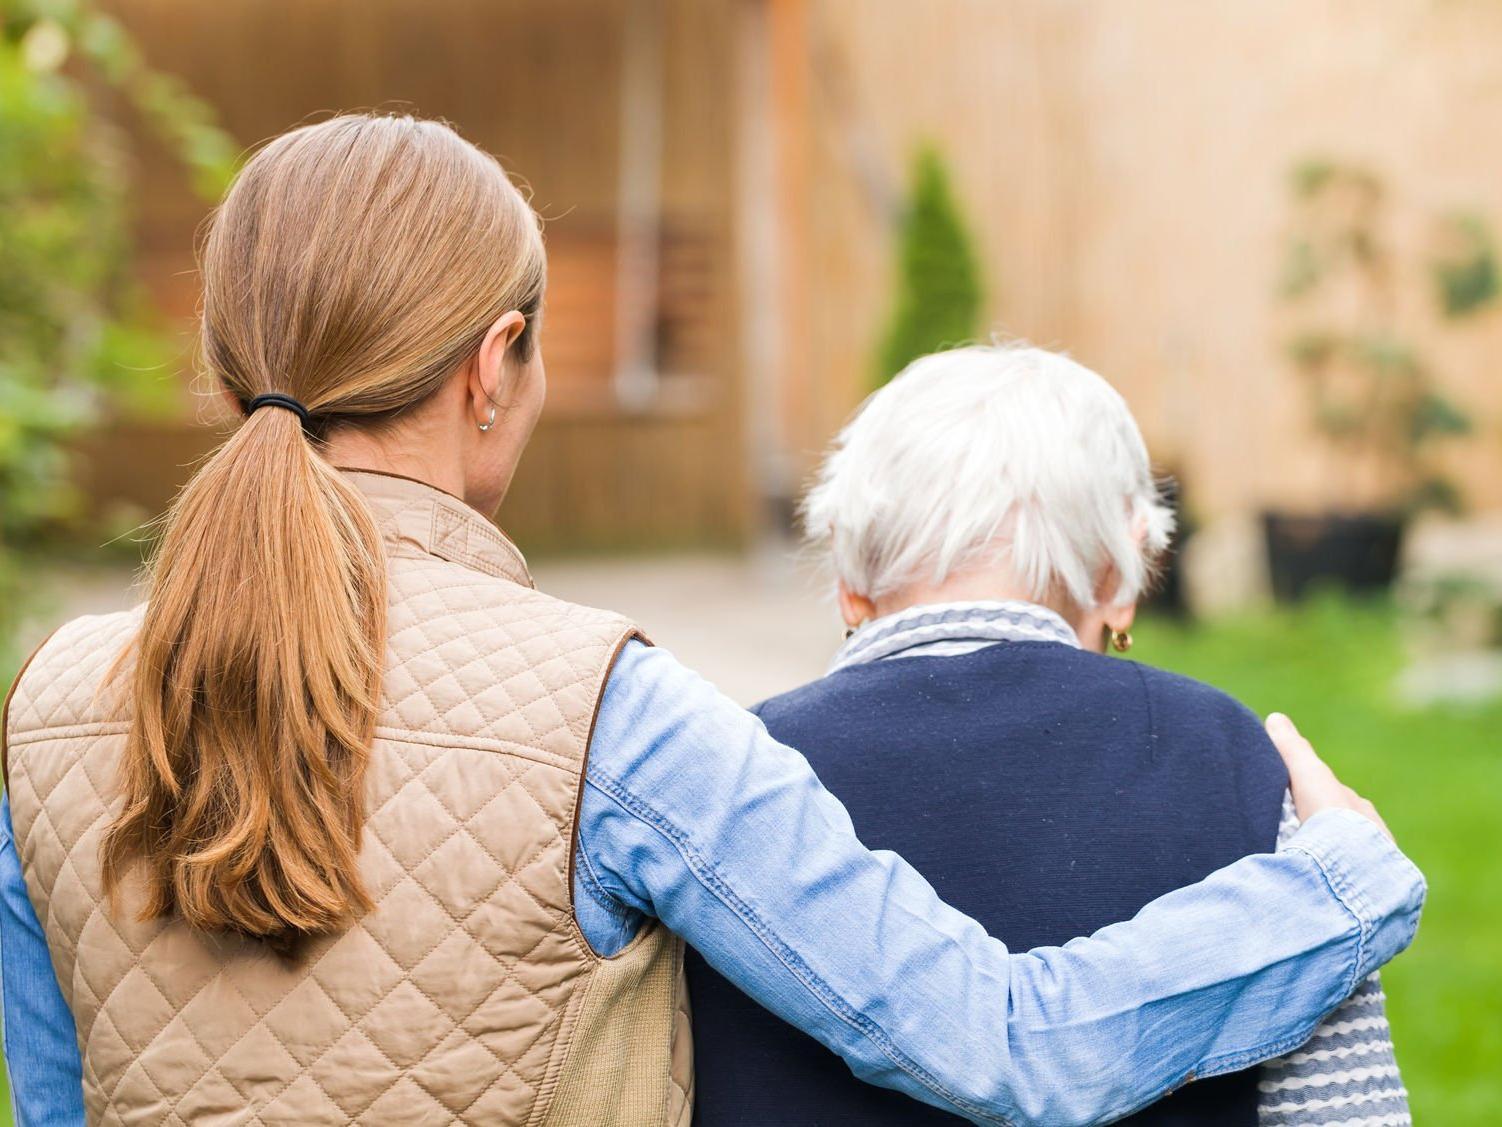 The ageing population needs more carers, it has been claimed.